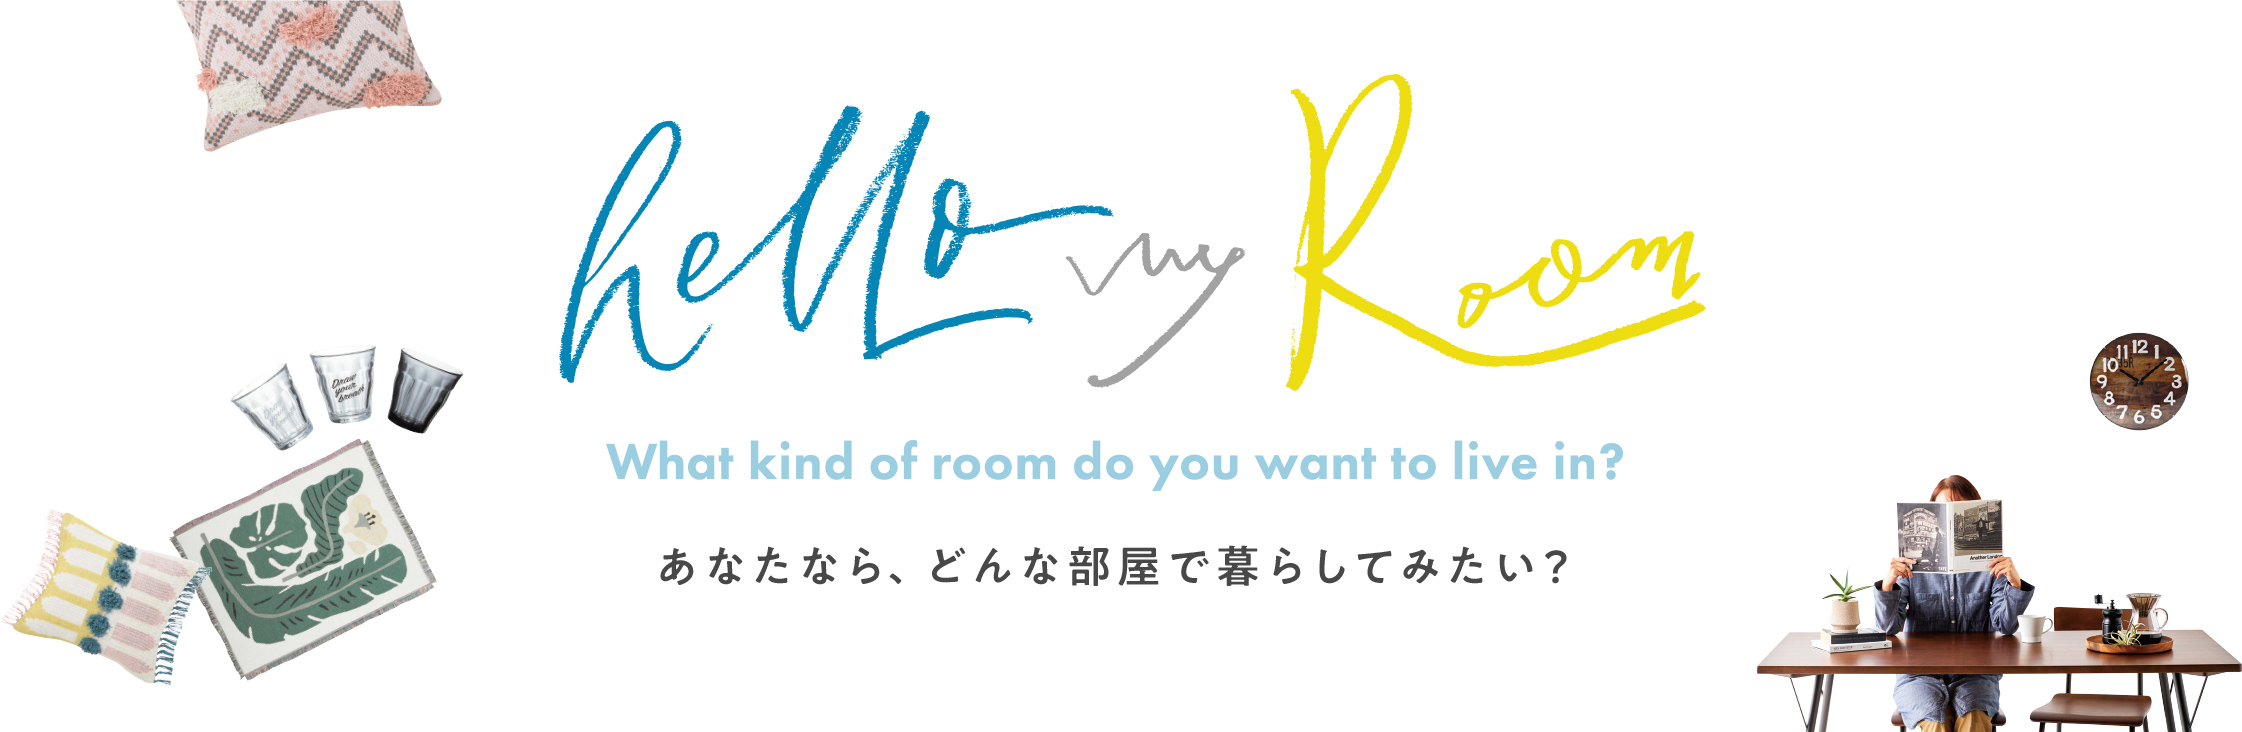 hello my Room what kind of room do you want to live in? あなたなら、どんな部屋で暮らしてみたい？